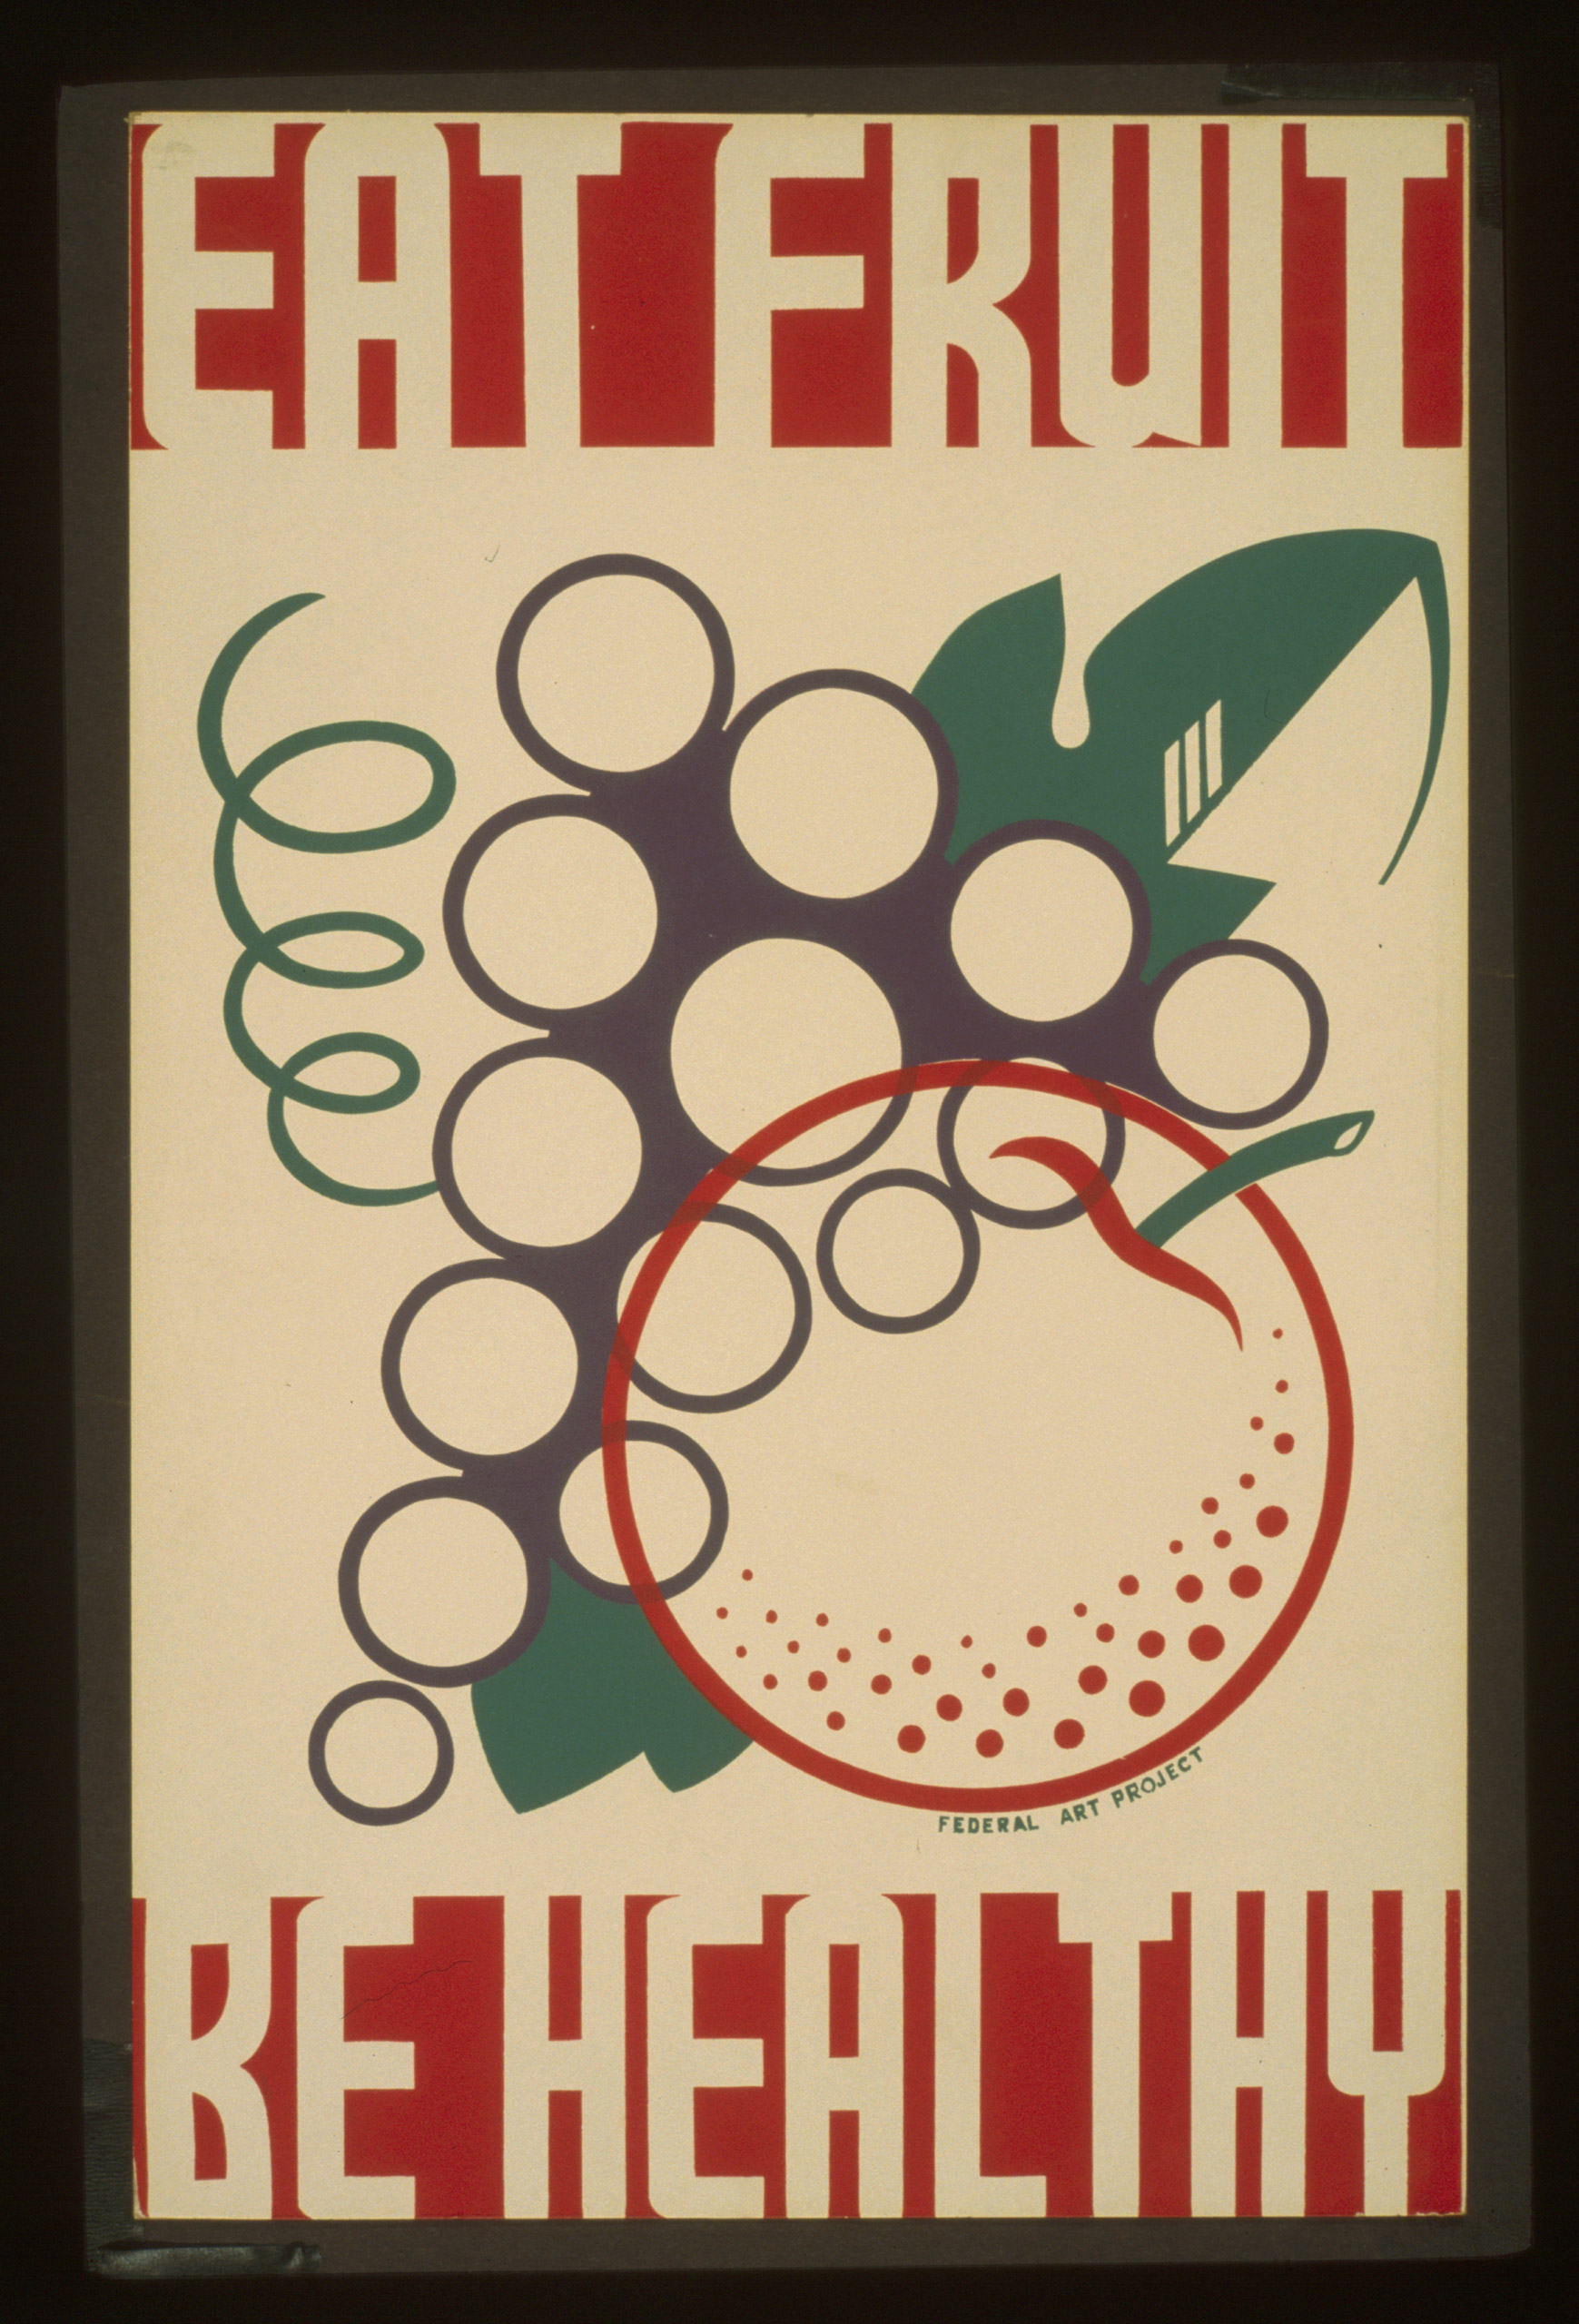 Poster promoting proper dietary habits, showing stylized fruit. Created between 1936 and 1938.